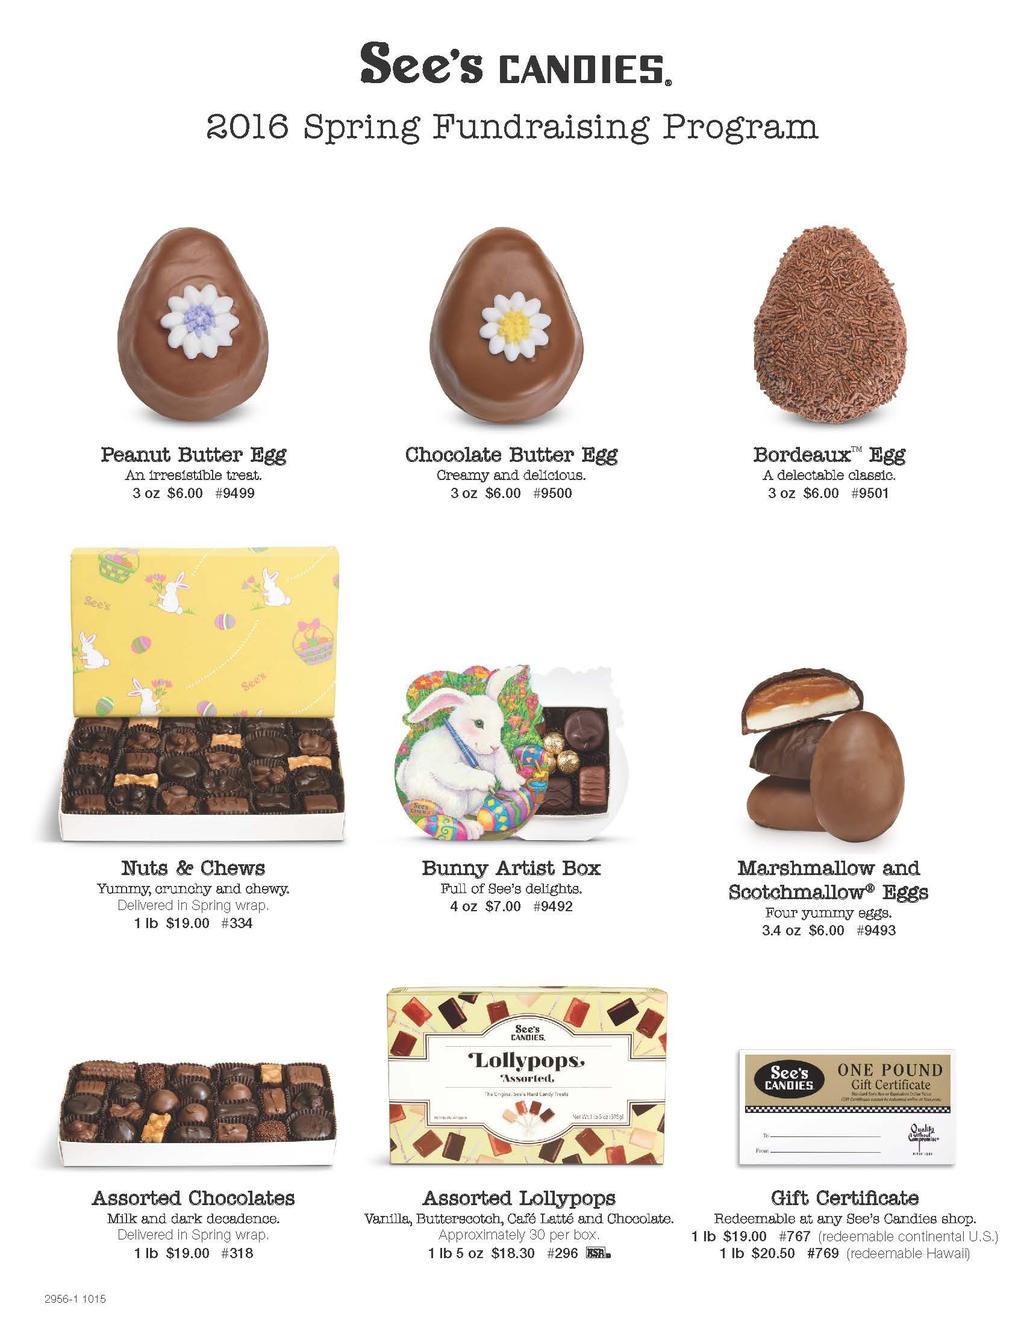 Easter Candy Sale: Benefitting the Youth Mission Trip in June Trinity Lutheran Church Youth Group is excited to announce the beginning of a See s Candies fundraiser in support of our June 2016 Youth